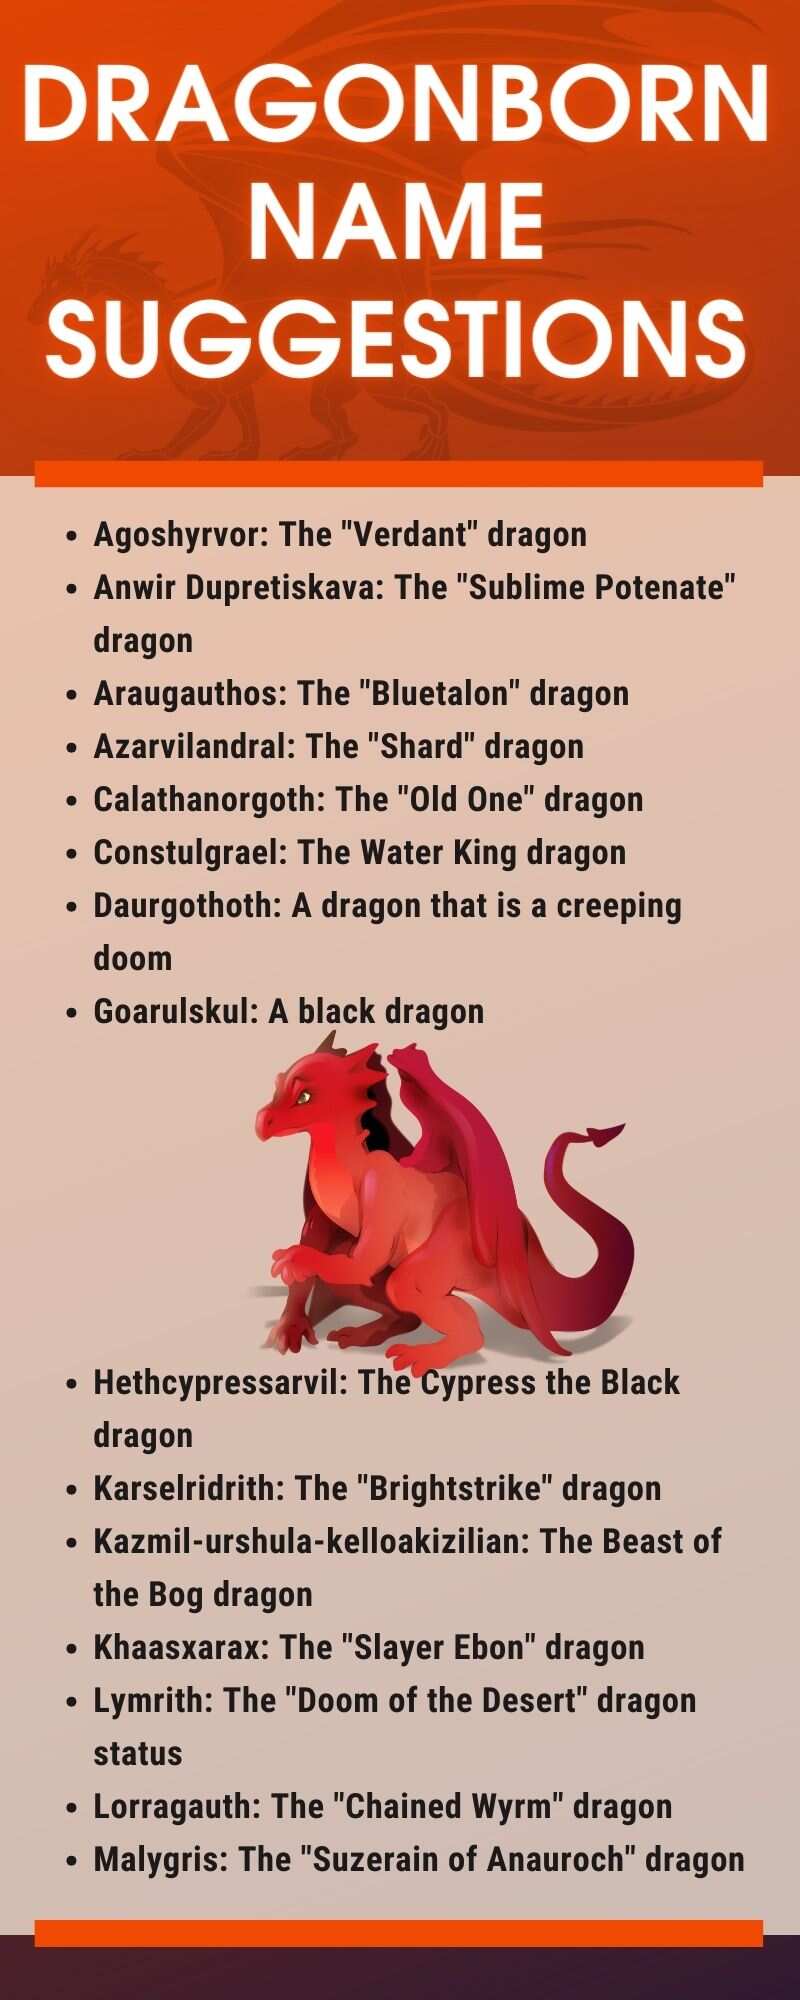 Dragonborn name suggestions for your newly created character